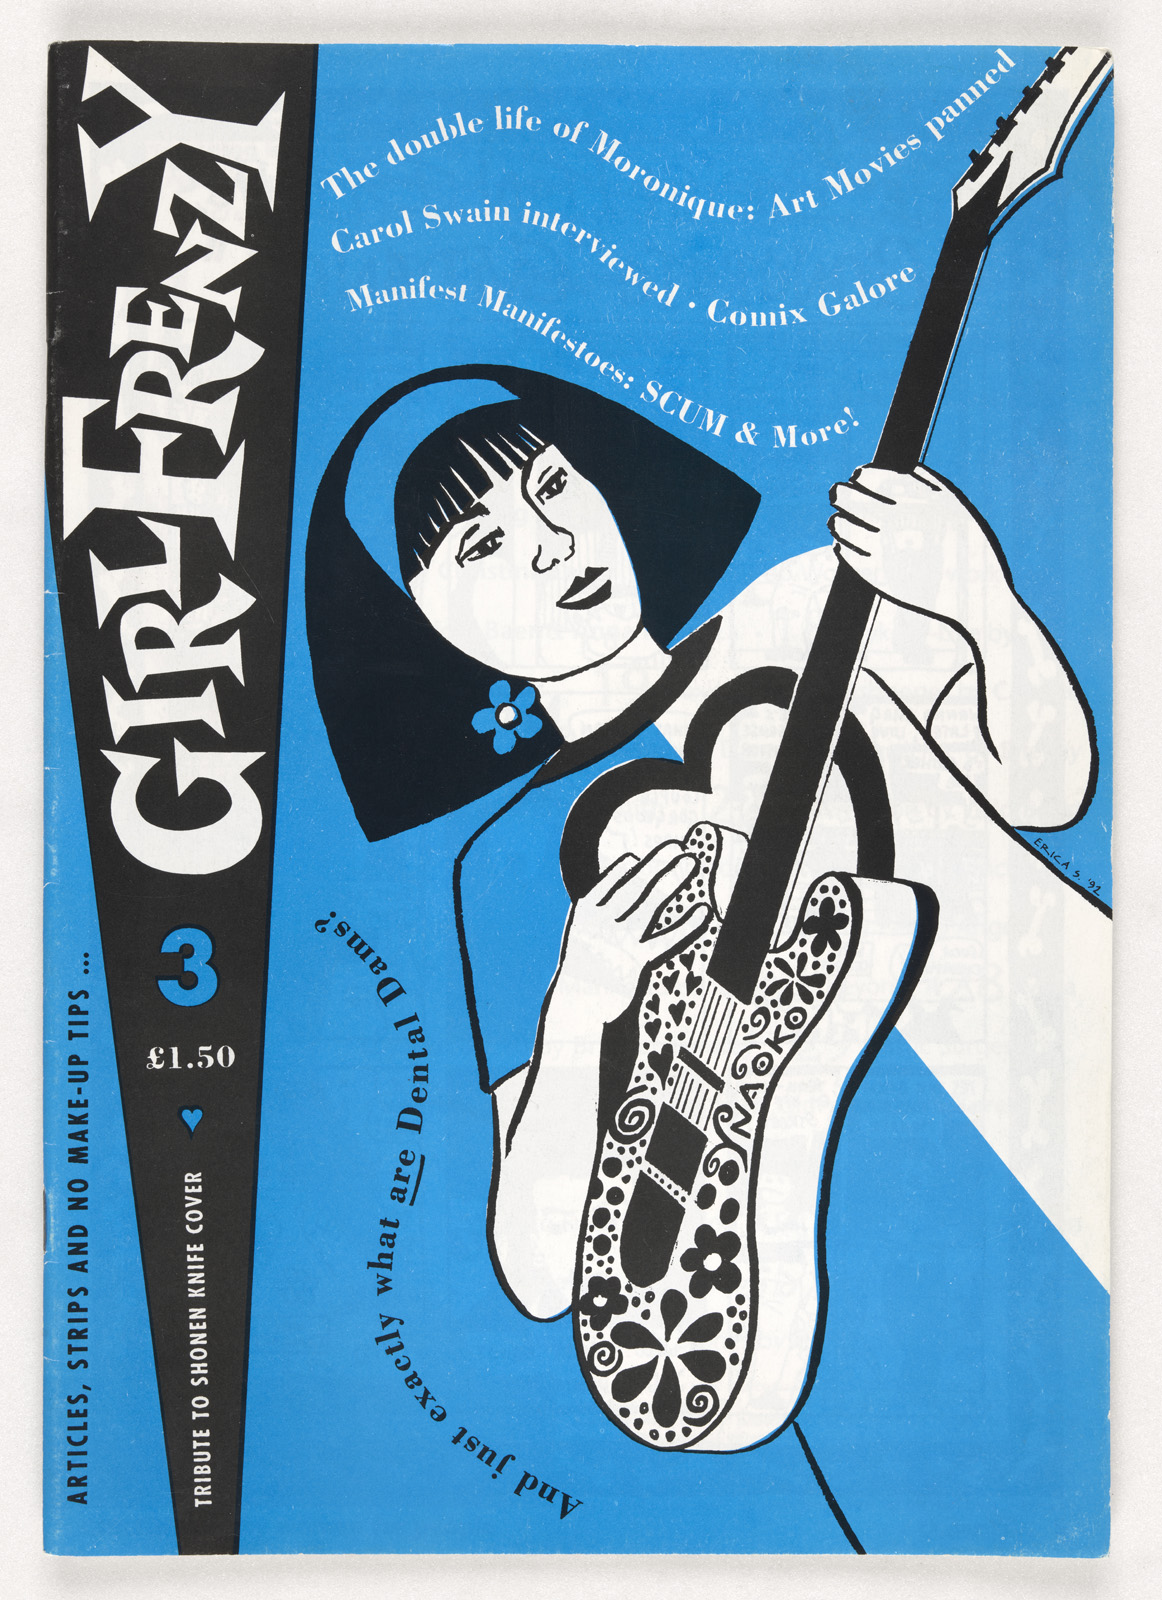 A photograph of the cover of GirlFrenzy zinie, blue cover with a drawn image of a woman playing a guitar